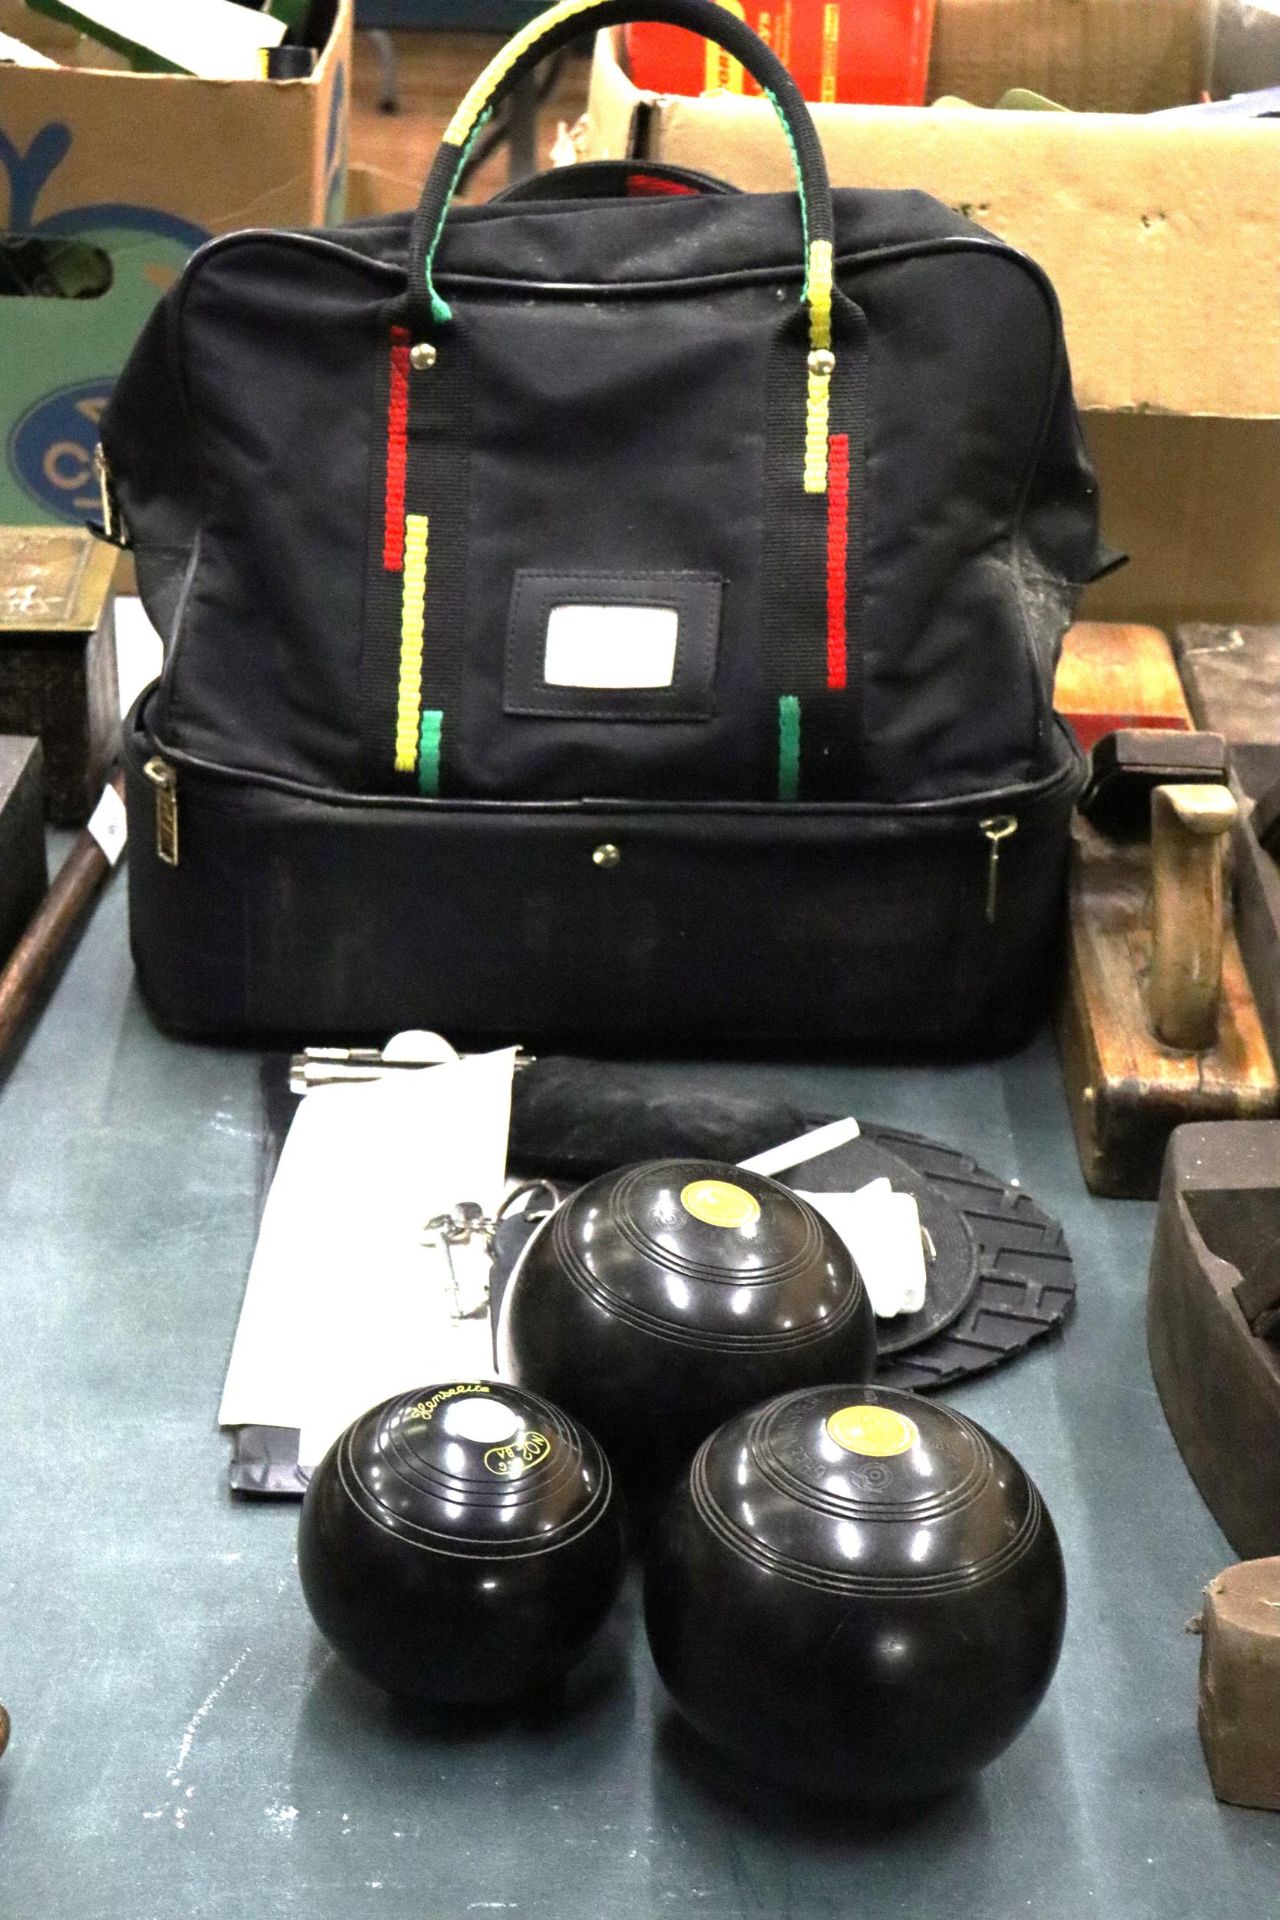 A PAIR OF GREENMASTER BOWLS, A JACK, ACCESSORIES AND A BOWLING BAG